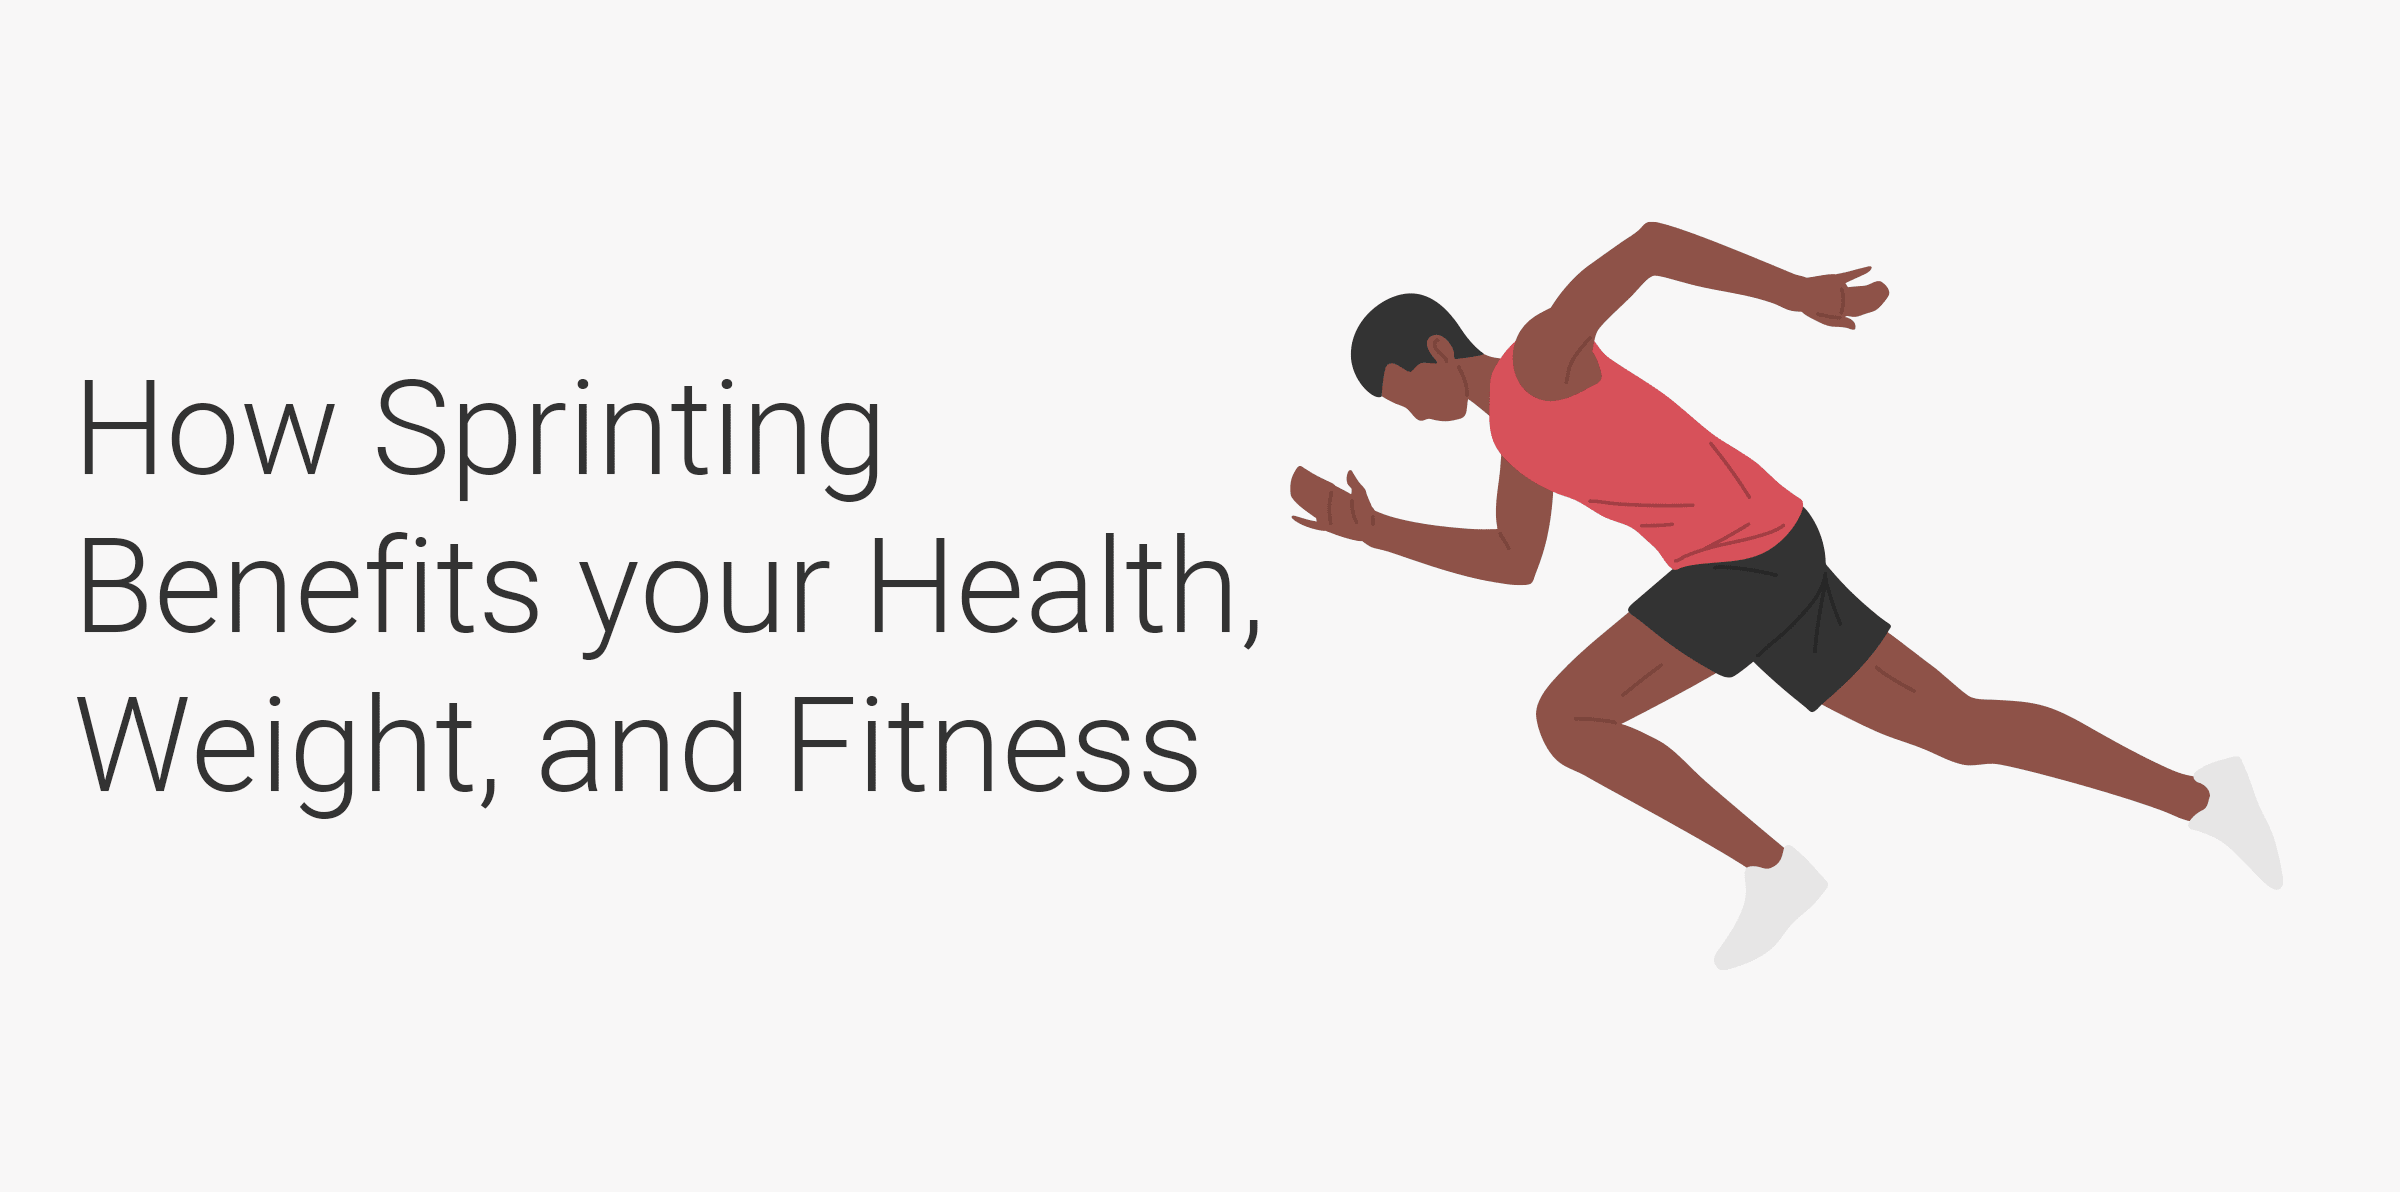 https://cdn.runrepeat.com/storage/uploads/research/benefits%20intrographs/How%20Sprinting%20Benefits%20your%20Health%2C%20Weight%2C%20and%20Fitness%20copy.png